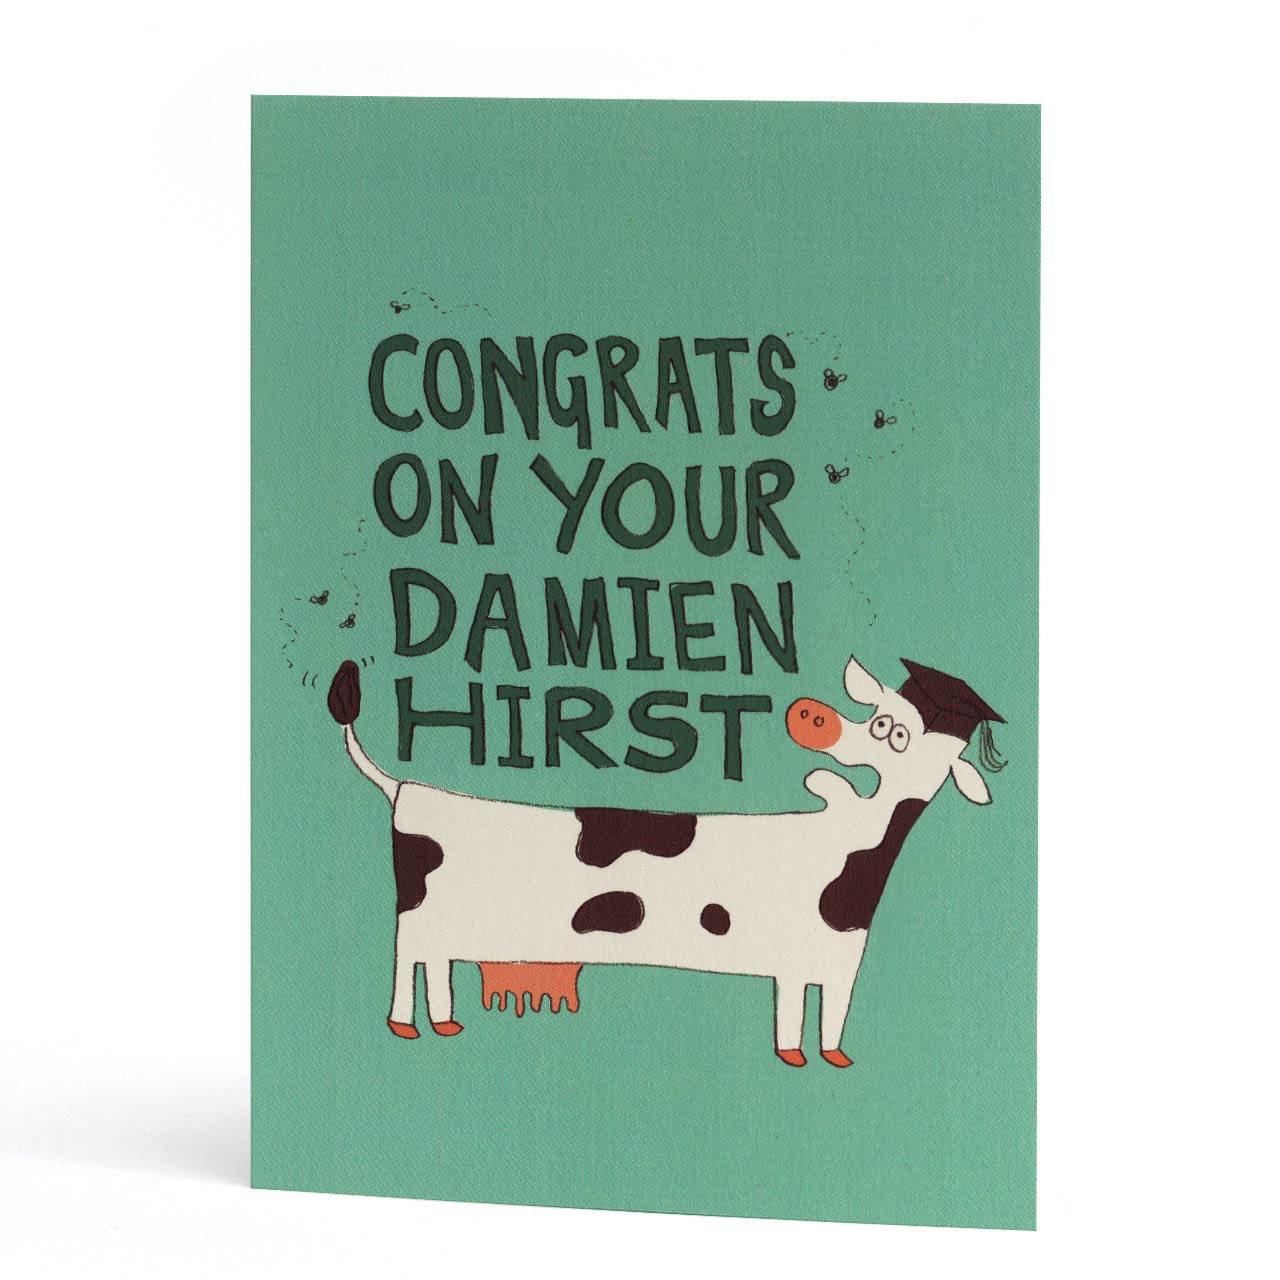 Congrats on Your First Class Degree (Damien Hirst) Card